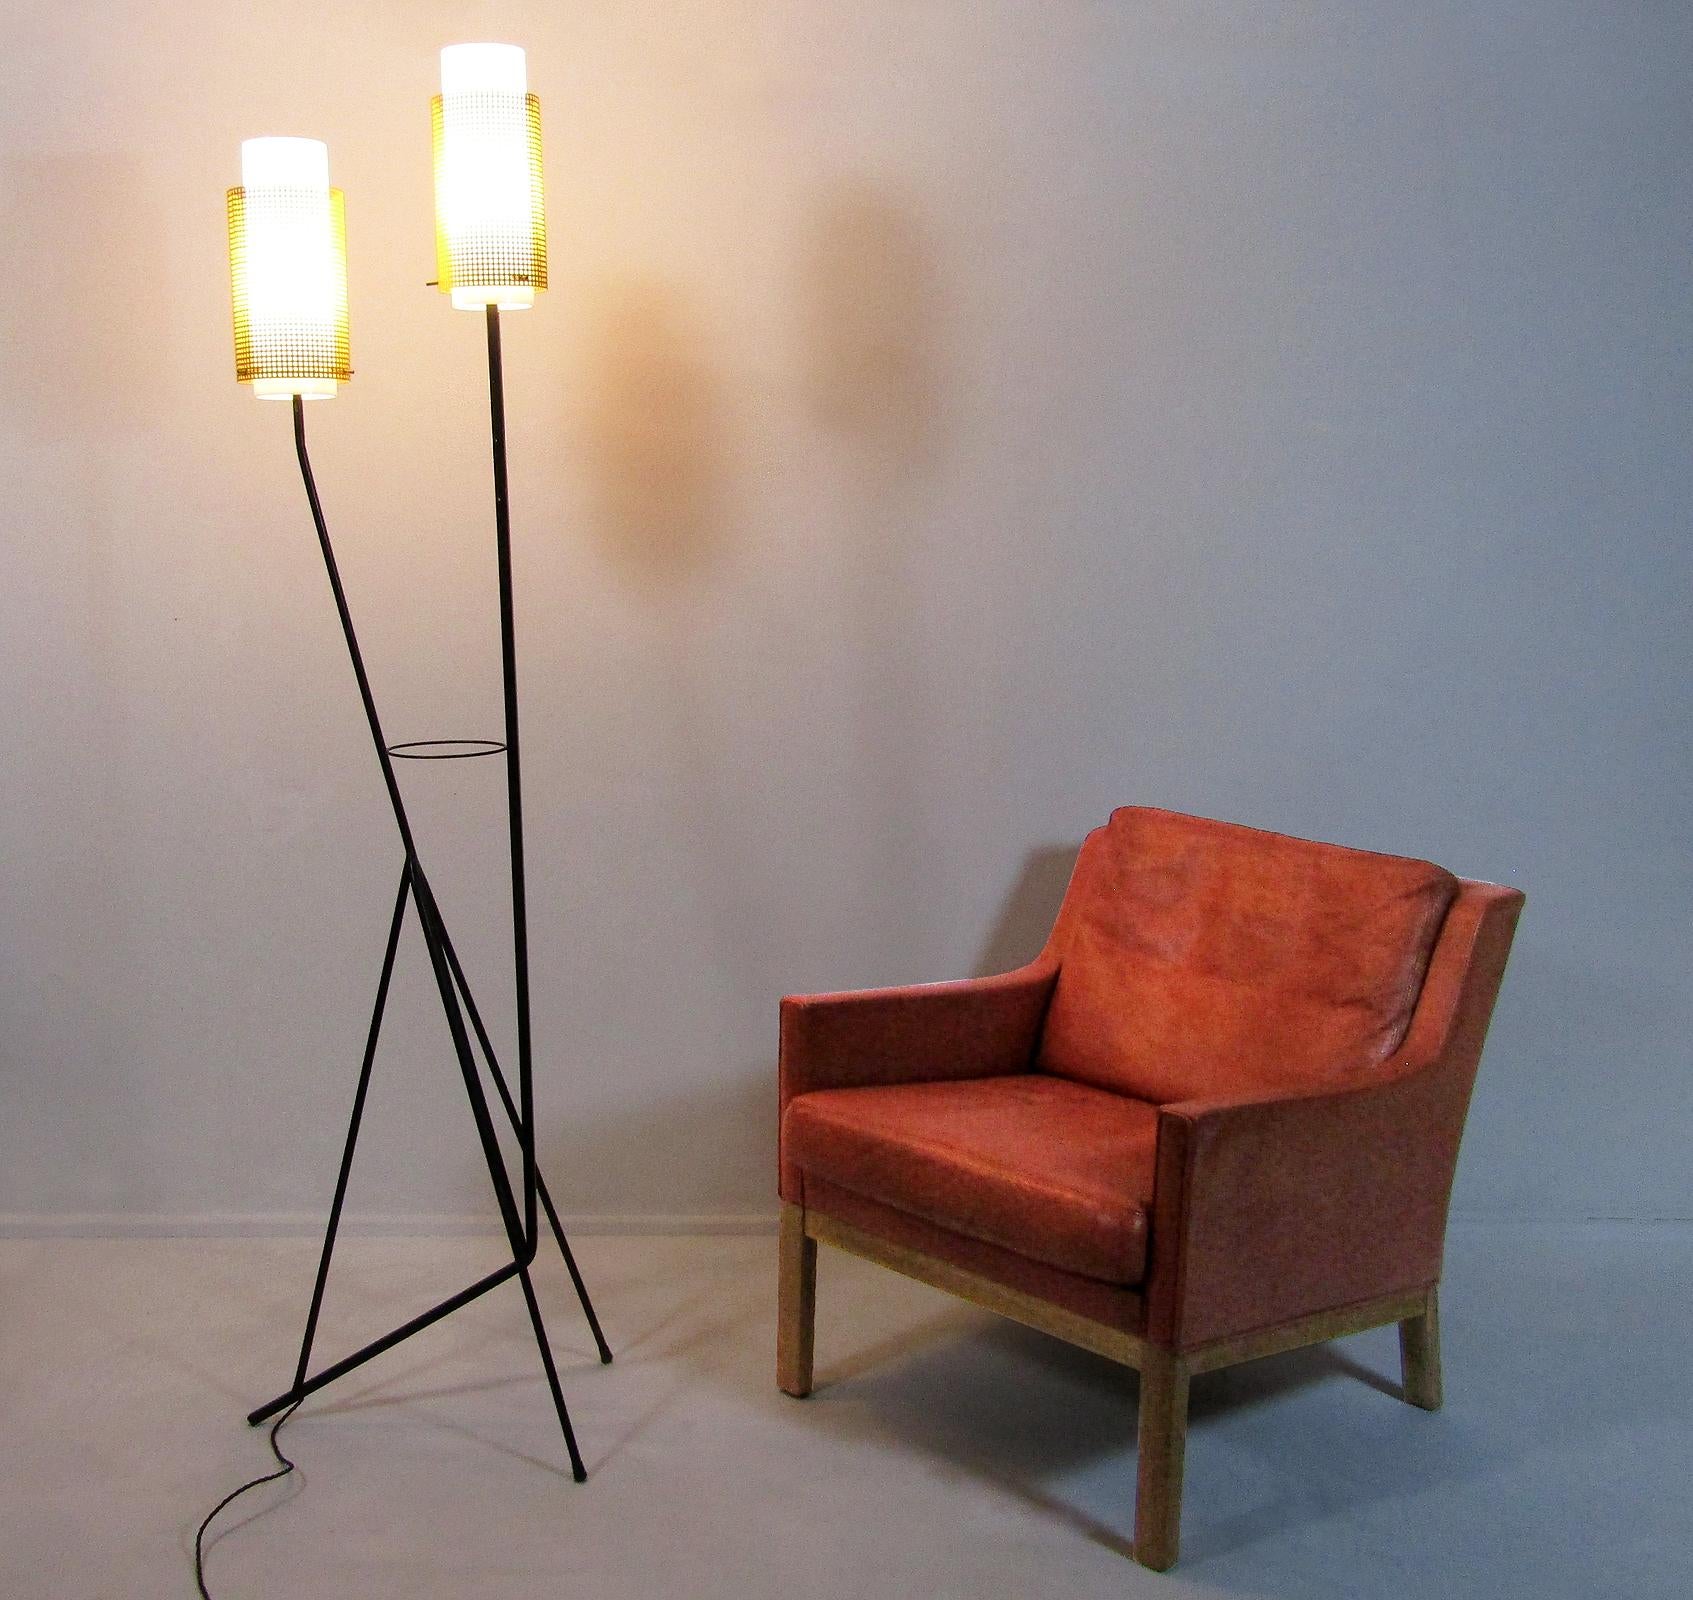 A tall 1960s French modernist floor lamp, attributed to Mathieu Mategot.

In perspex and perforated steel, this sleek double light evokes a pair of lovers embracing. It emits a warm, dispersed light over a wide area.

It is in very good working